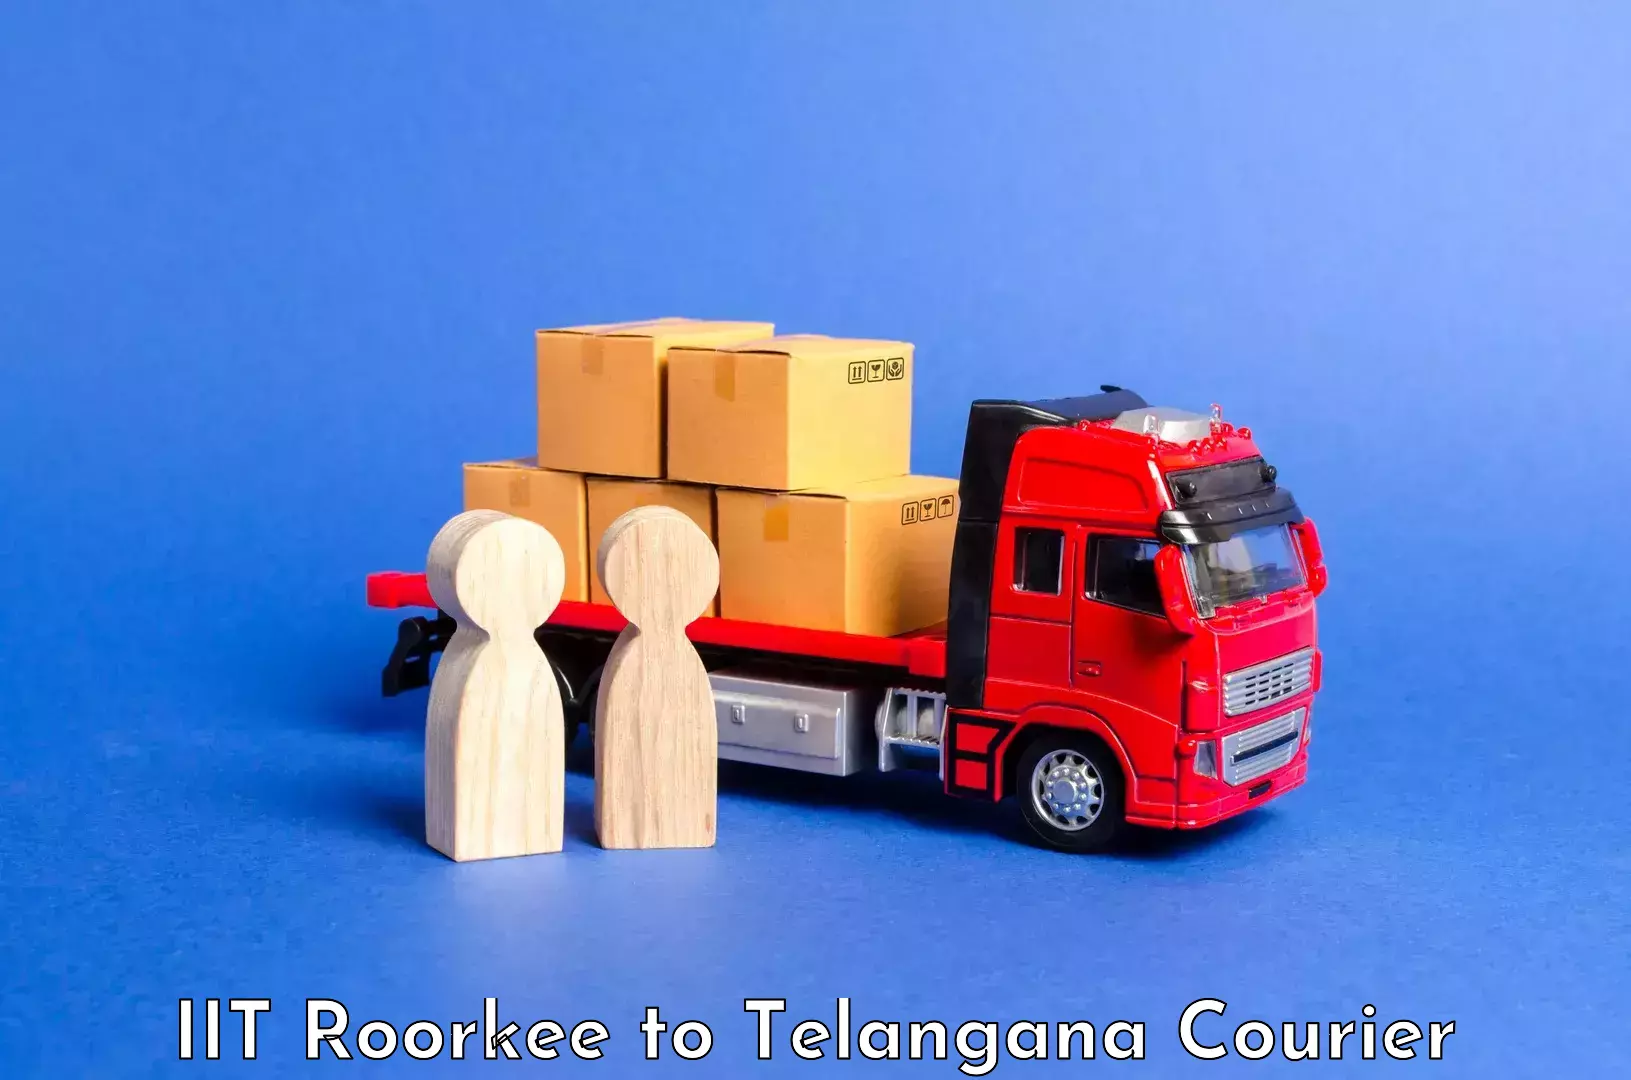 Luggage transport company IIT Roorkee to Mancherial